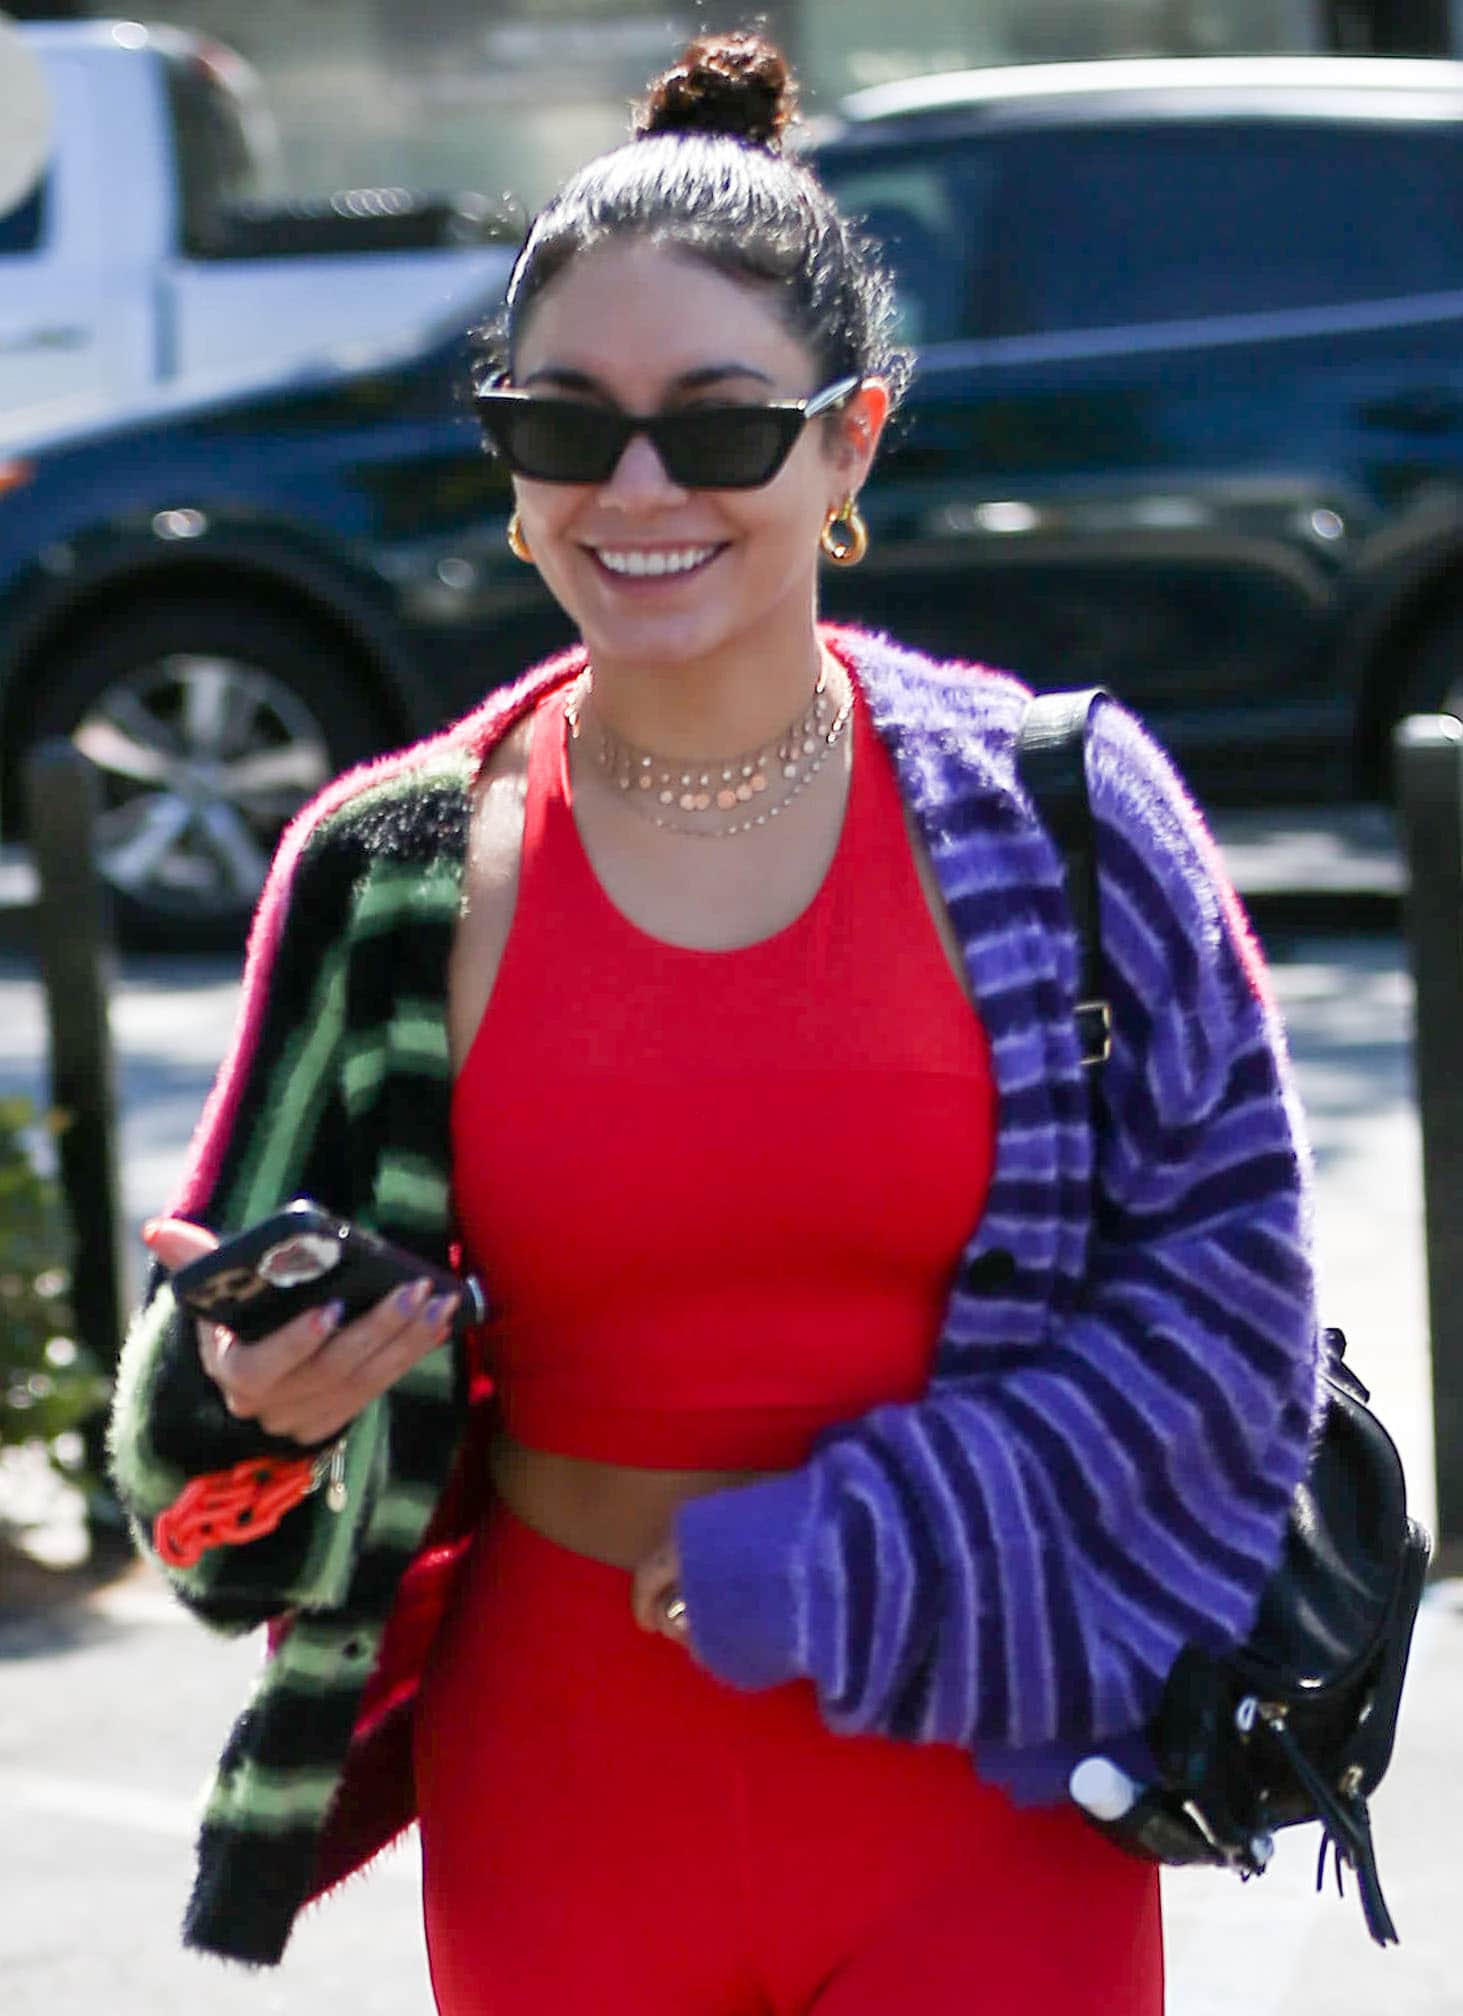 Vanessa Hudgens pulls her hair up into a tight high bun and covers her eyes with black sunglasses